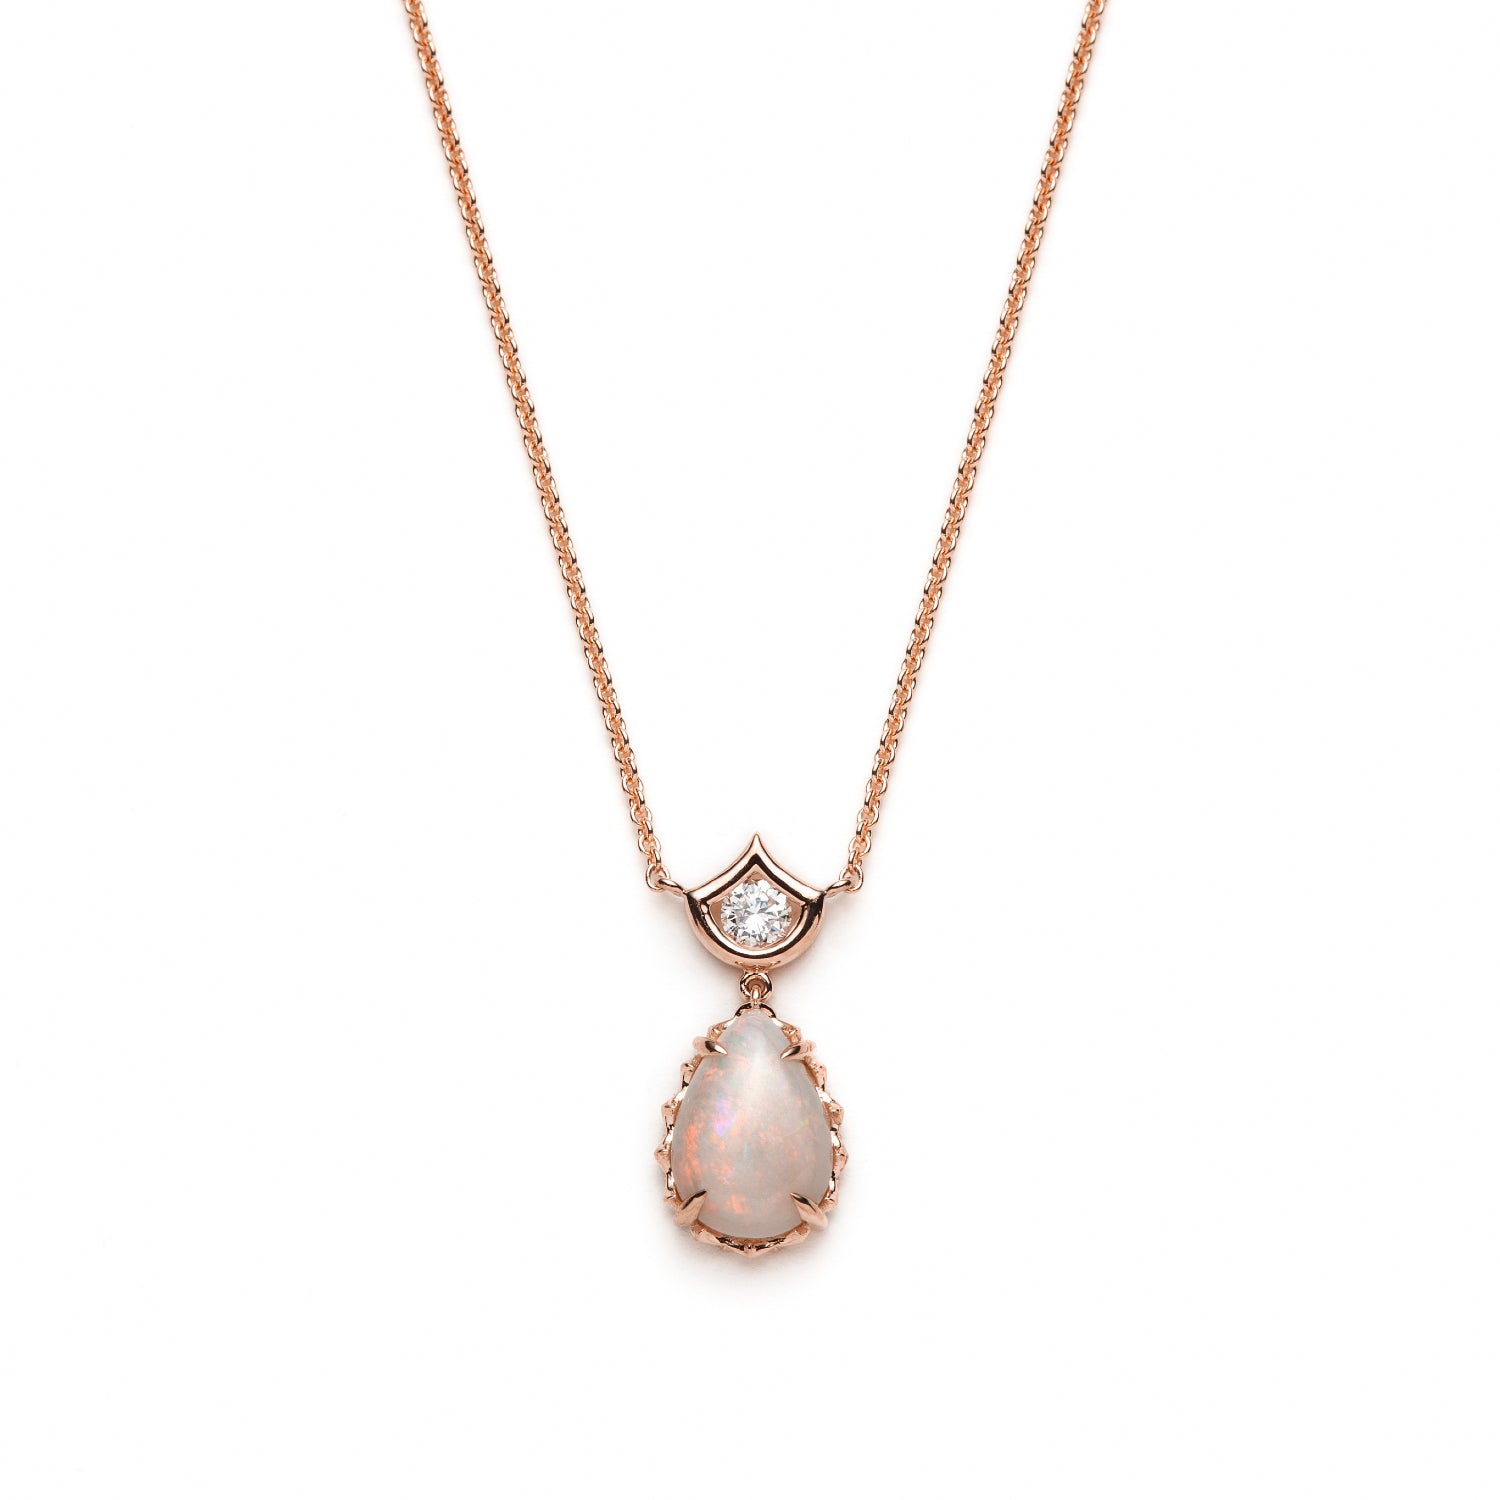 Lepi Pear-Shaped Opal and Diamond Necklace in Rose Gold